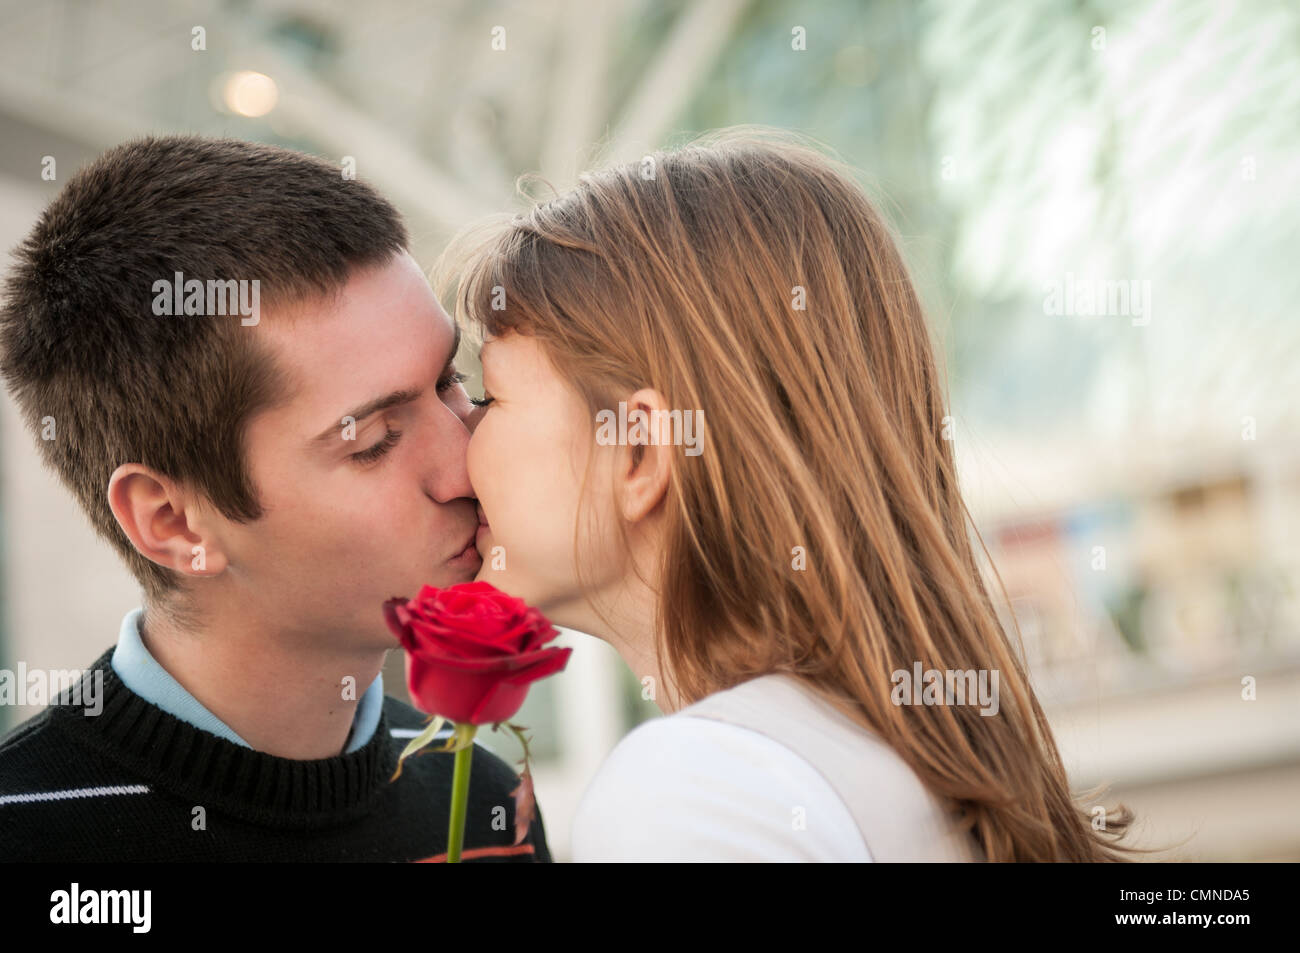 Young man handing over a flower (red rose) to woman and kissing ...